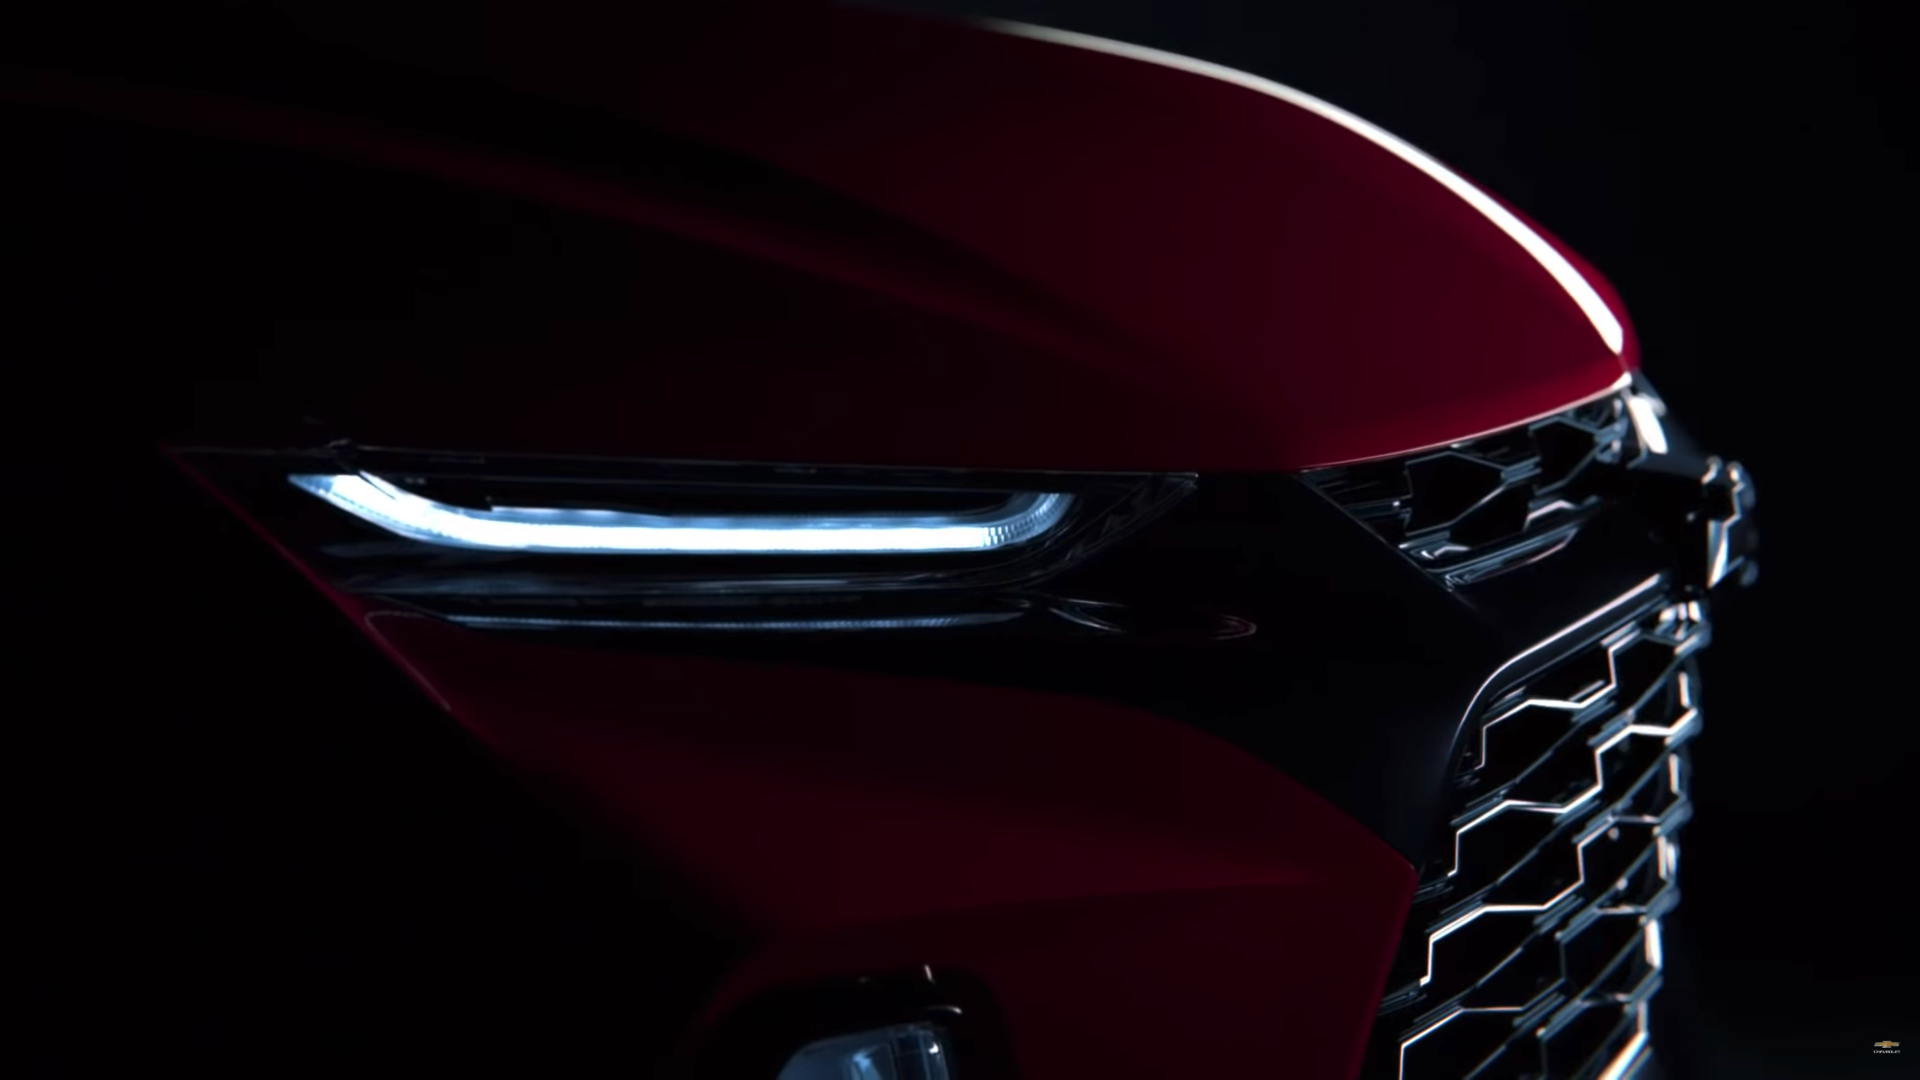 2019 Chevrolet Blazer Is Coming, Ad Campaign Goes Live